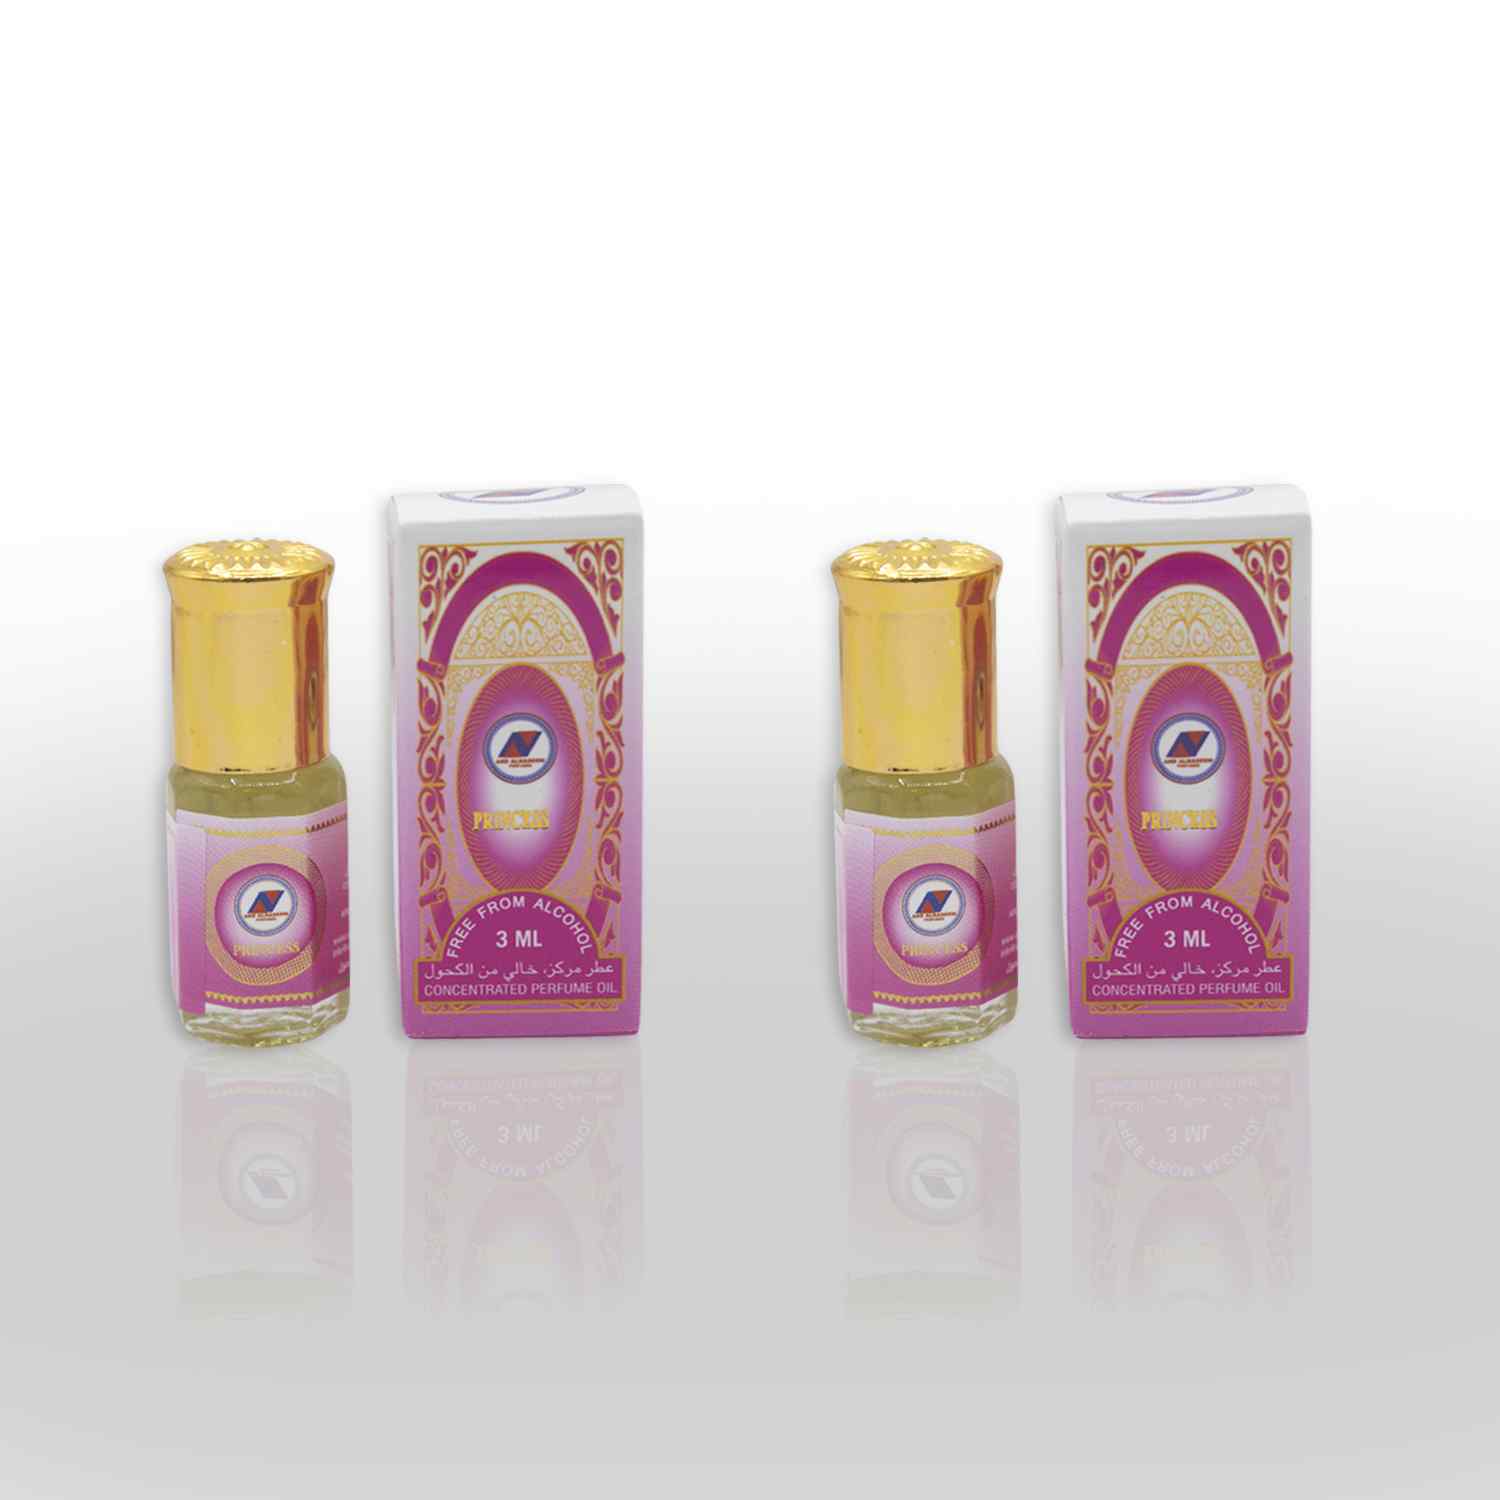 Princess concentrated oil attar 3ml by ard perfumes